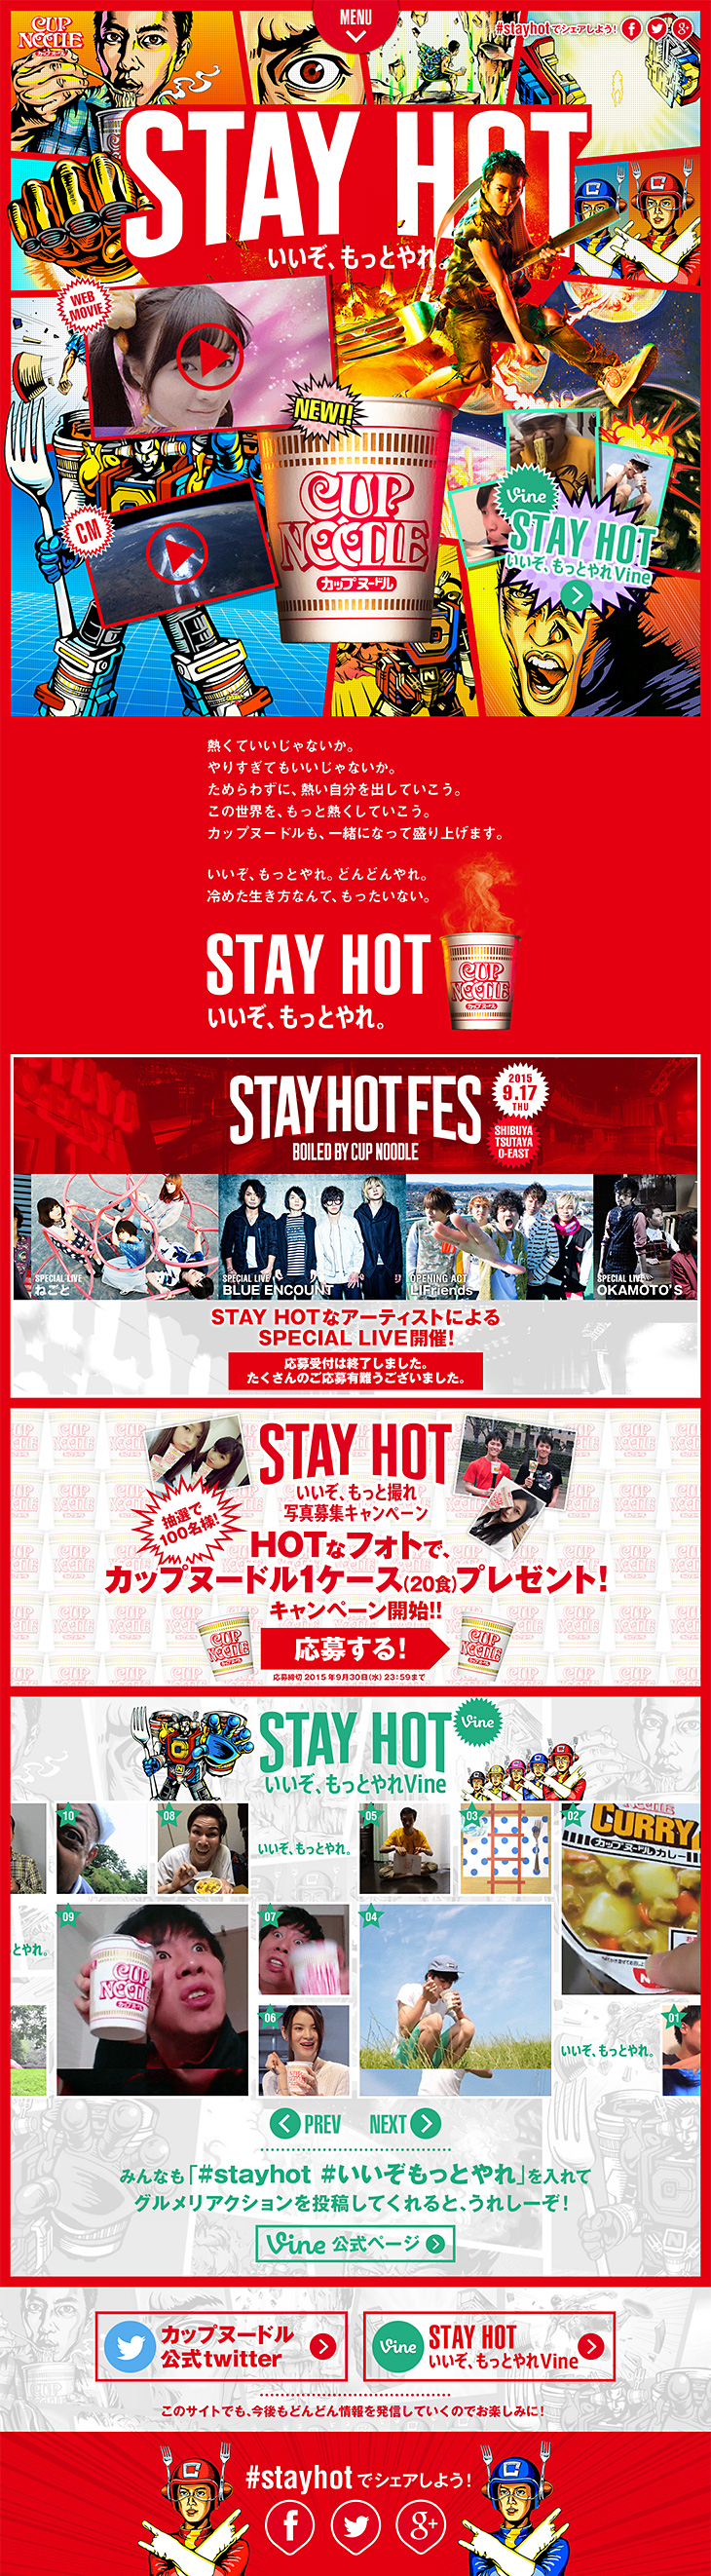 STAY HOTいいぞ、もっとやれ。CUP NOODLE_pc_1